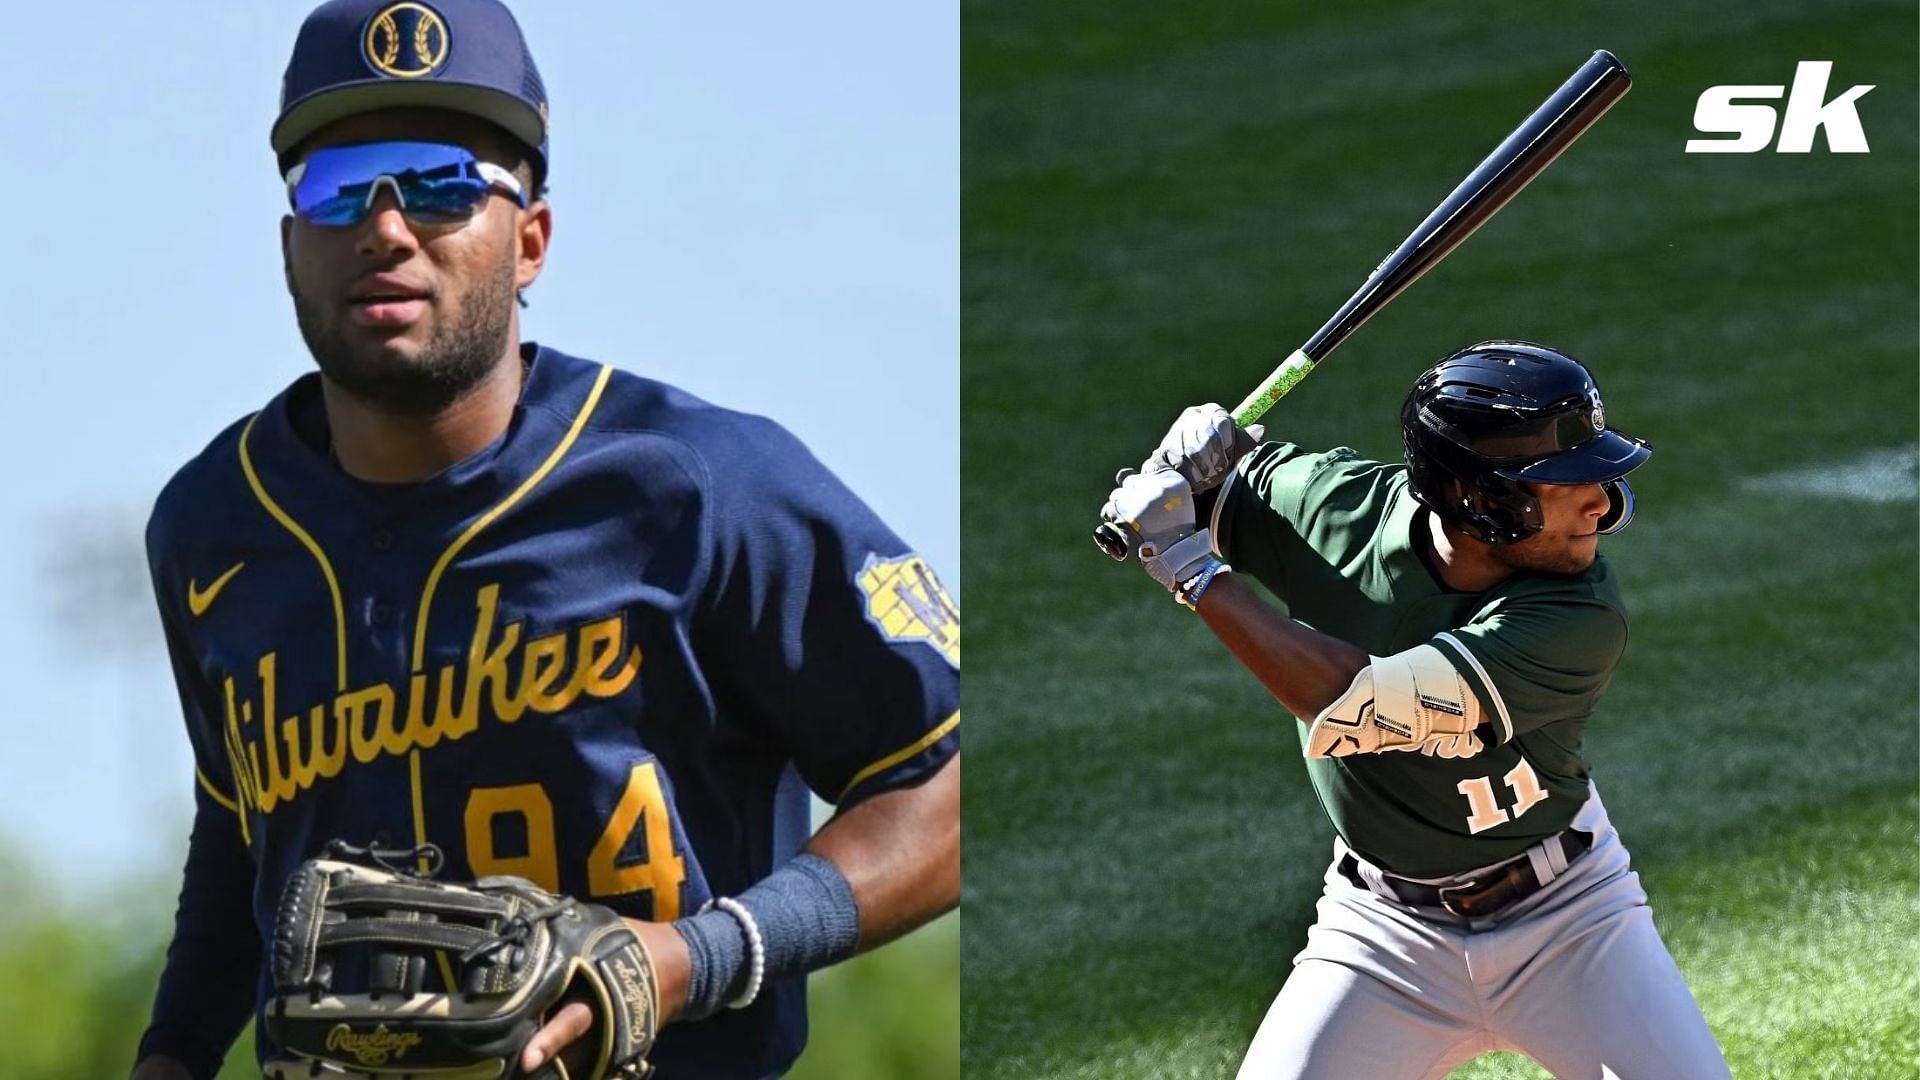 Milwaukee Brewers outfielder Jackson Chourio has been named the number two prospect in baseball